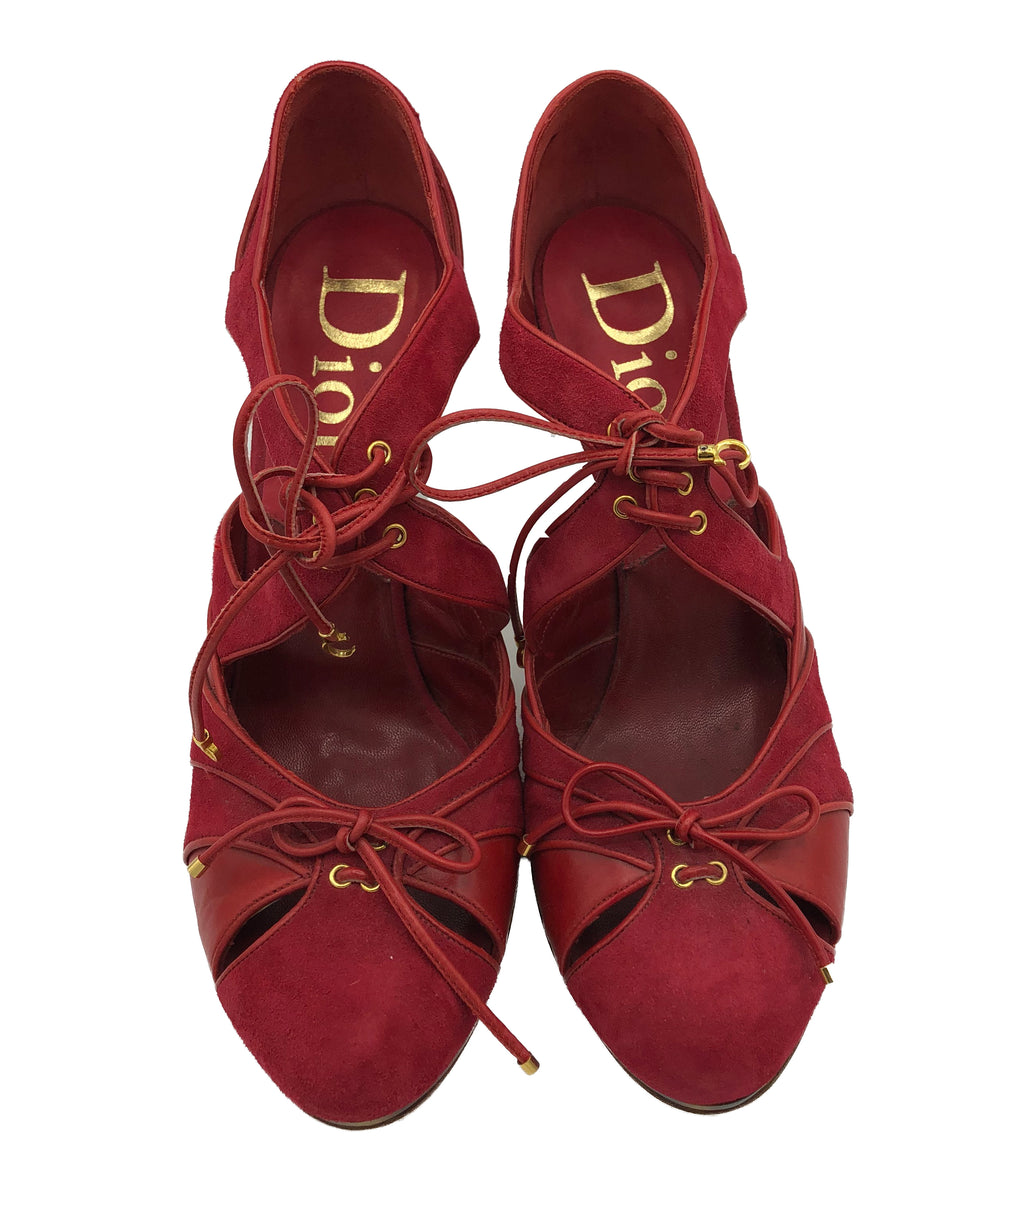 Dior Contemporary Tortoise Heeled Red Suede Shoes 1 of 6